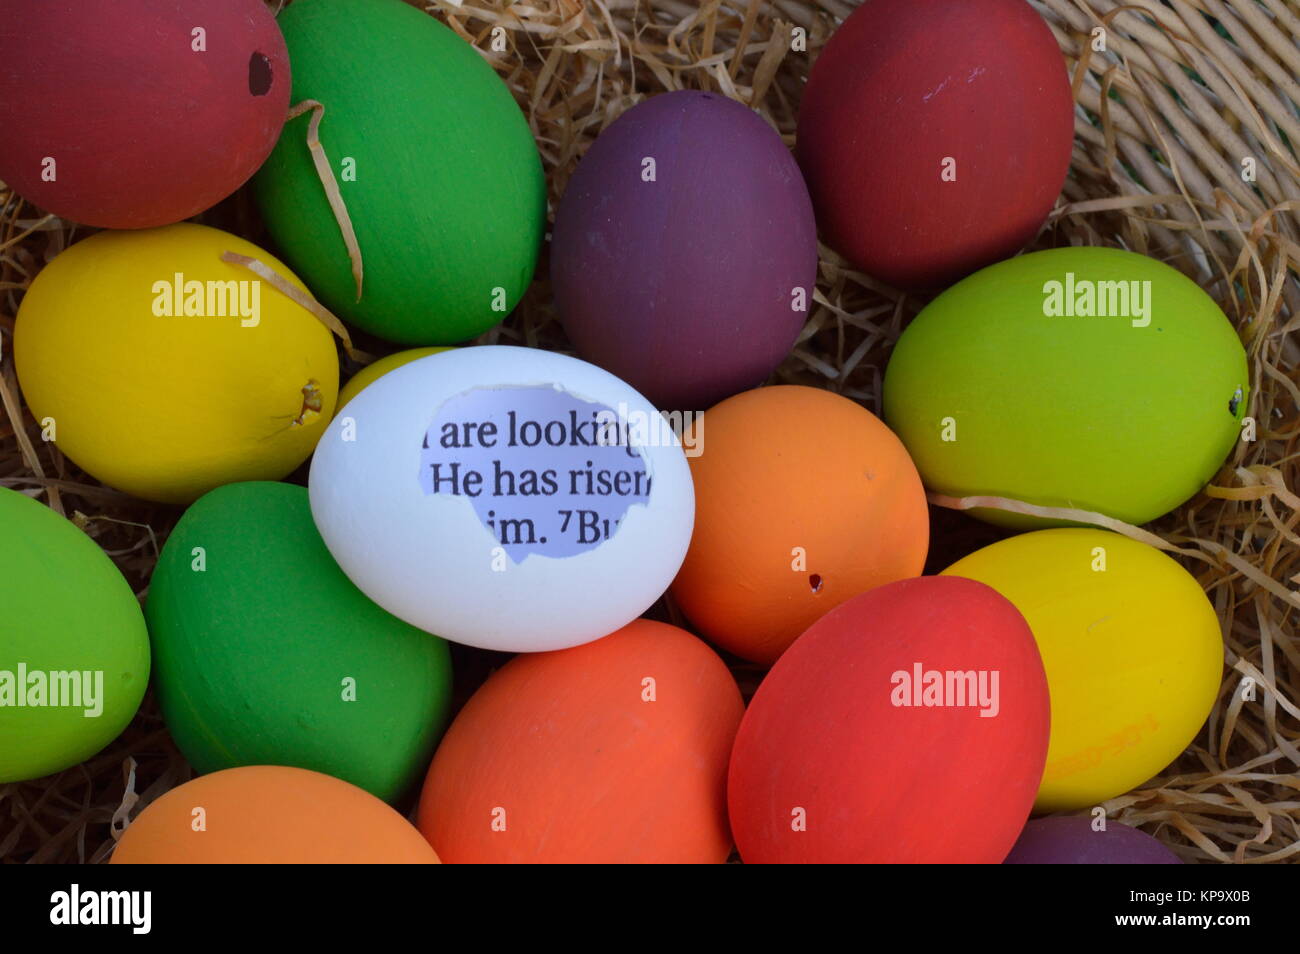 bright white egg with broken shell and Bible text in the words: HE HAS RISEN in the midst of many colorful Easter eggs Stock Photo